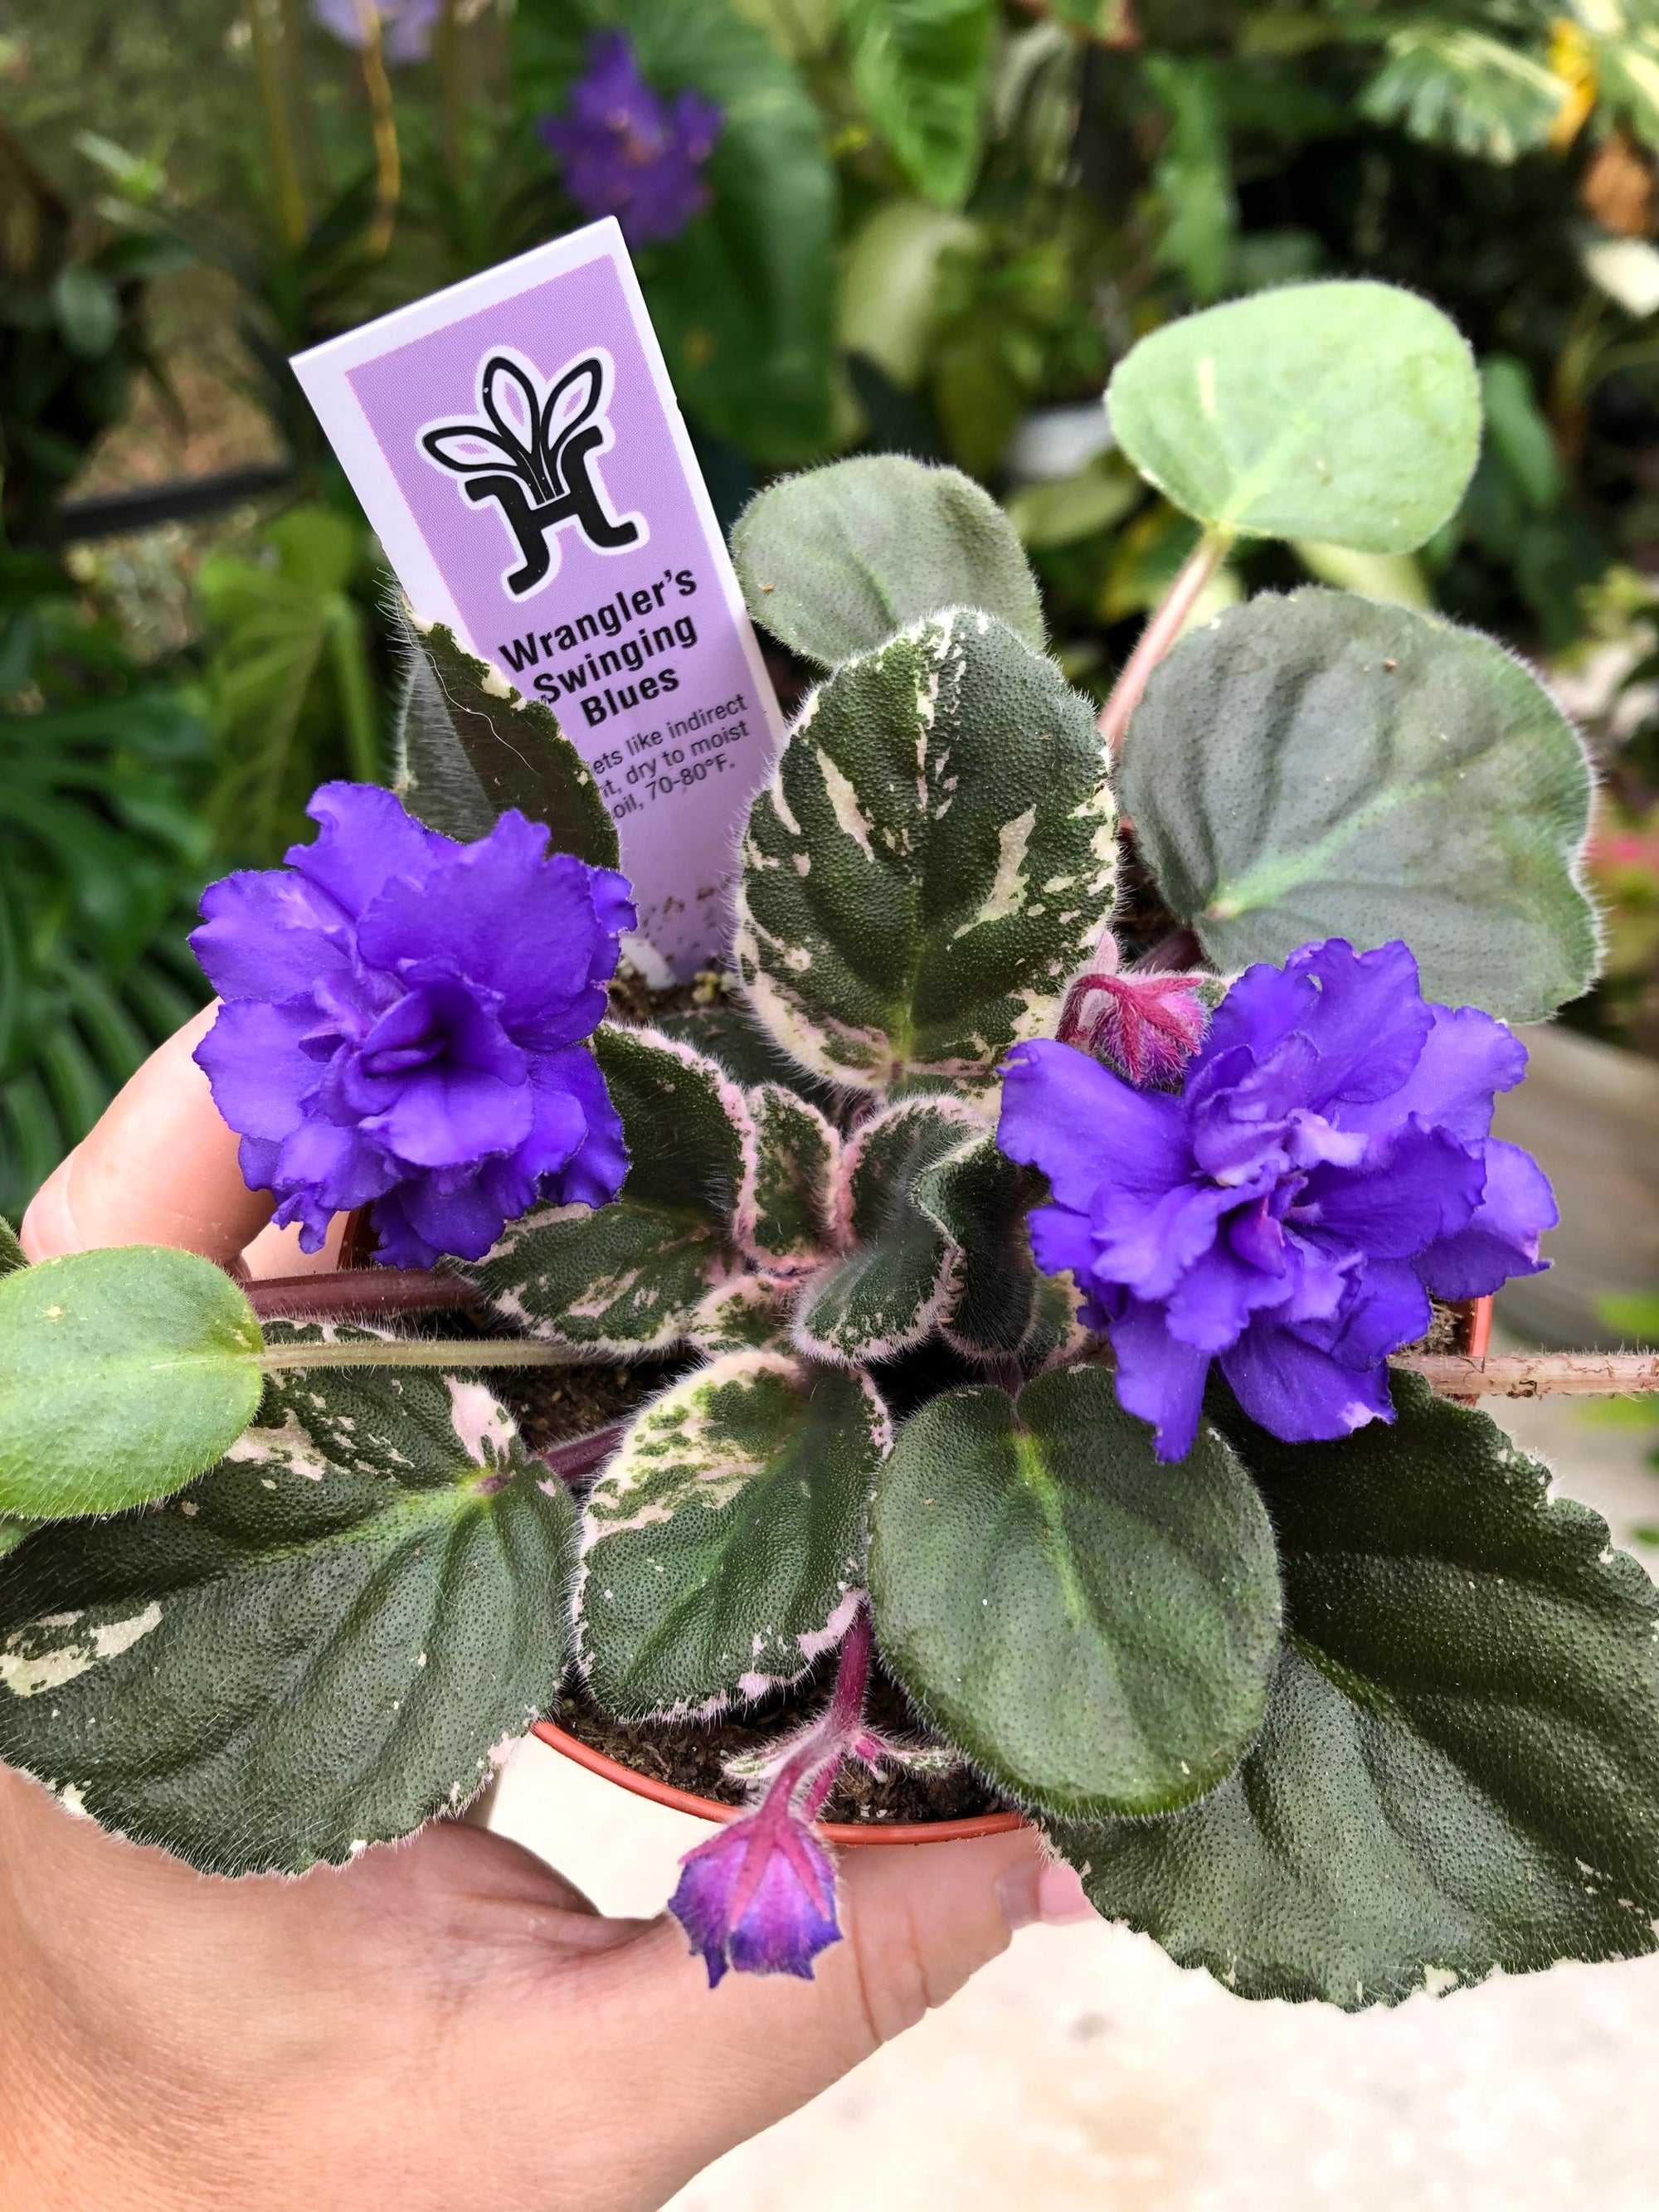 Live house plant variegated African Violet Harmony’s ‘Wrangler’s Swinging Blues’ garden 4” in flower Potted gift